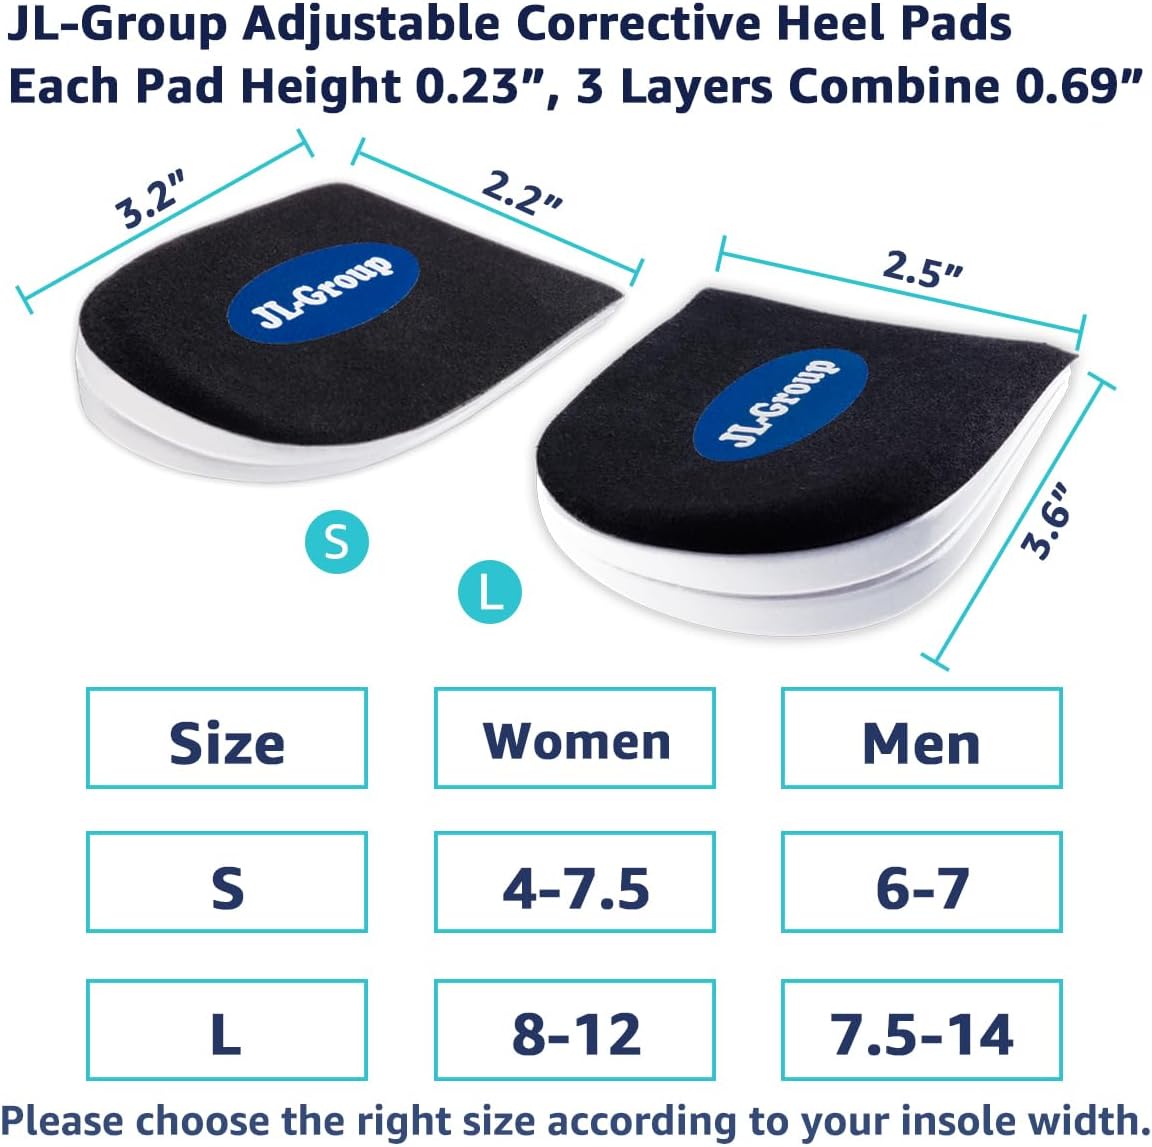 3 Layer Heel Wedge Inserts for Supination  Over Pronation, Microfabric Adjustable Corrective Insoles for Ankel Sprains, Bow Legs, Foot Alignment, Knee Pain (Large, Black)